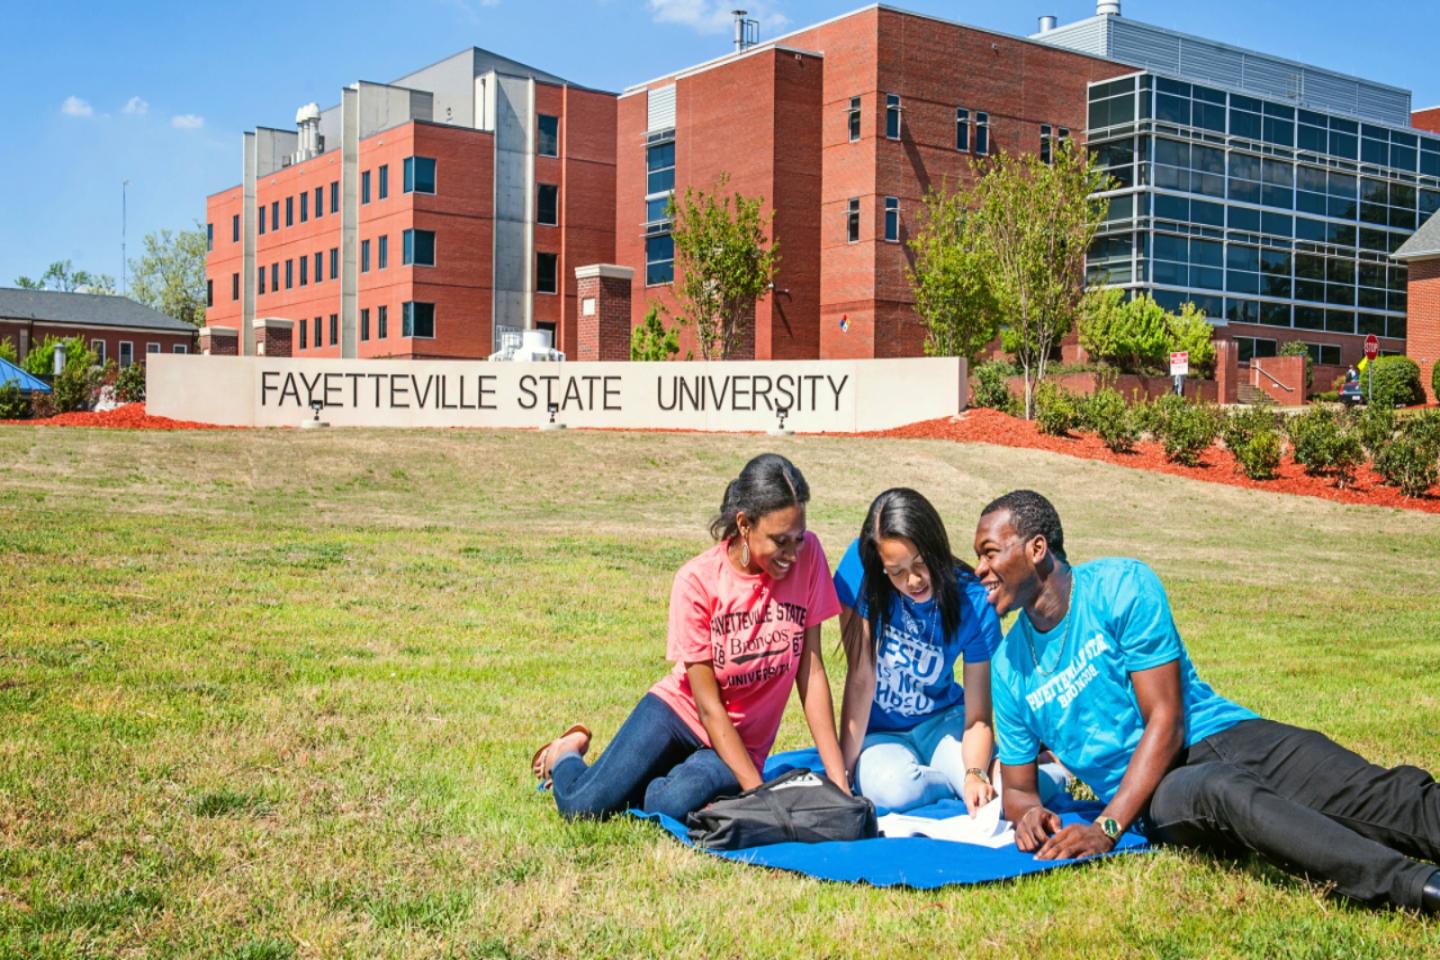 Students on the Fayetteville State University campus.